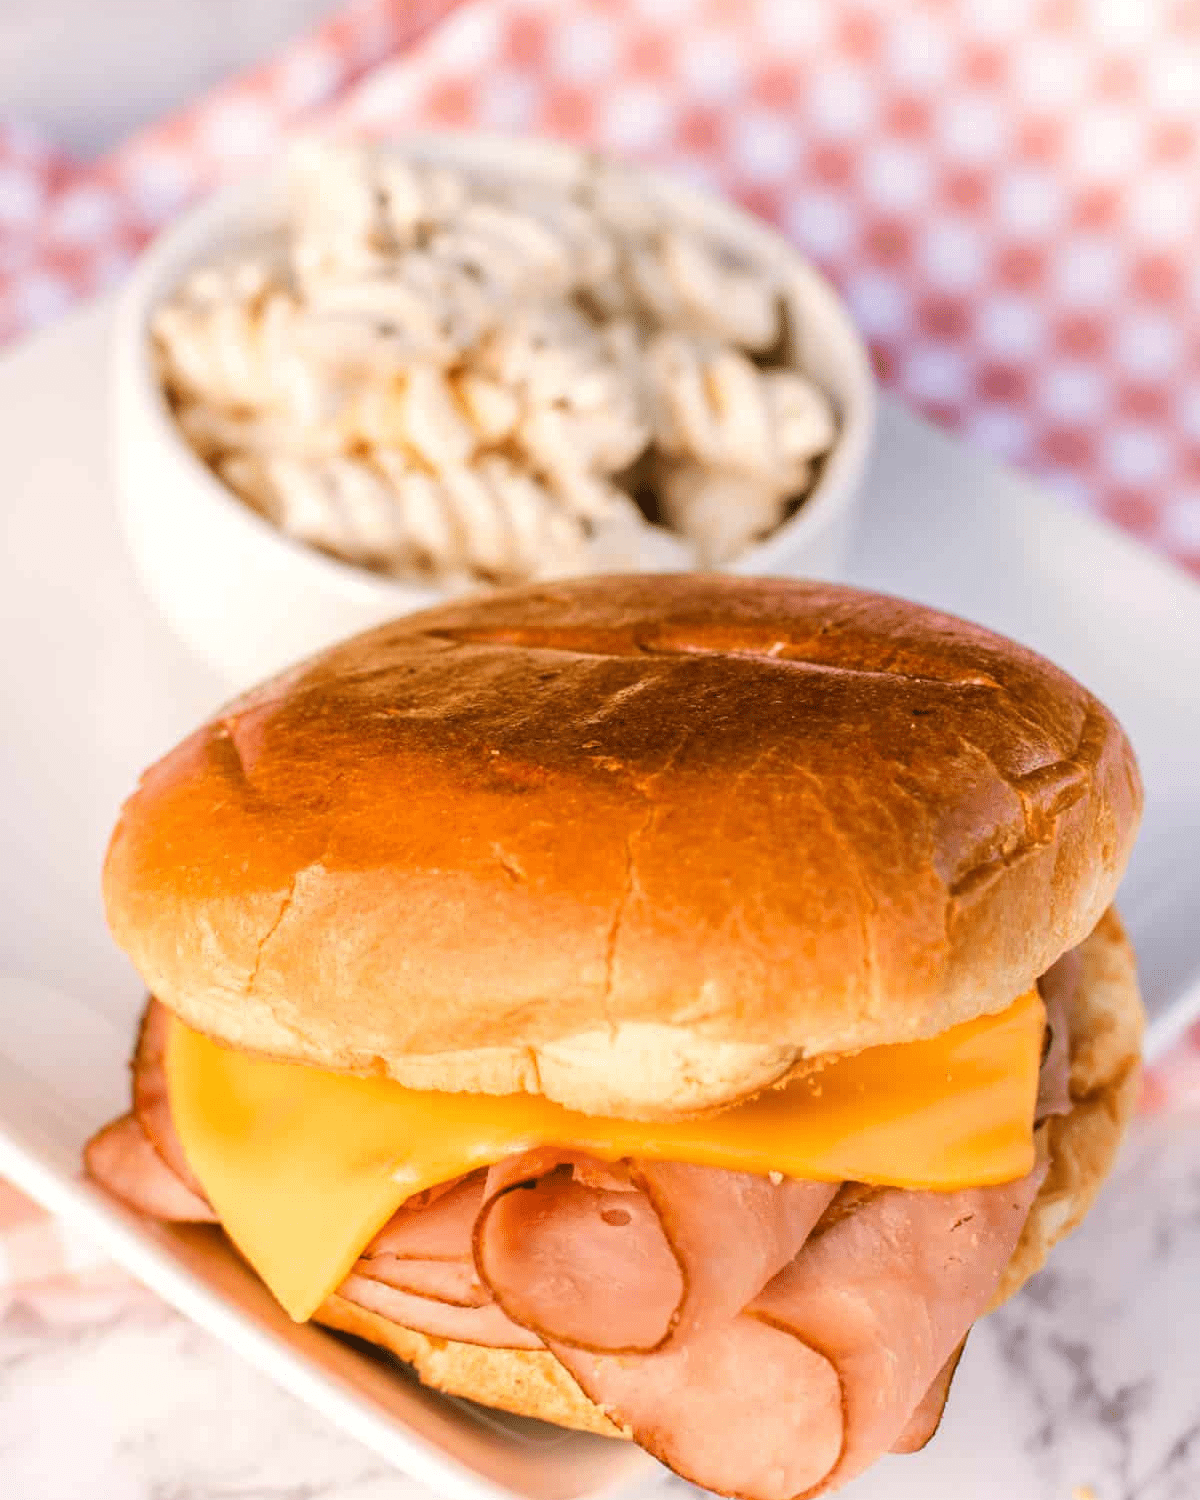 Hot ham and cheese sandwich with pasta salad